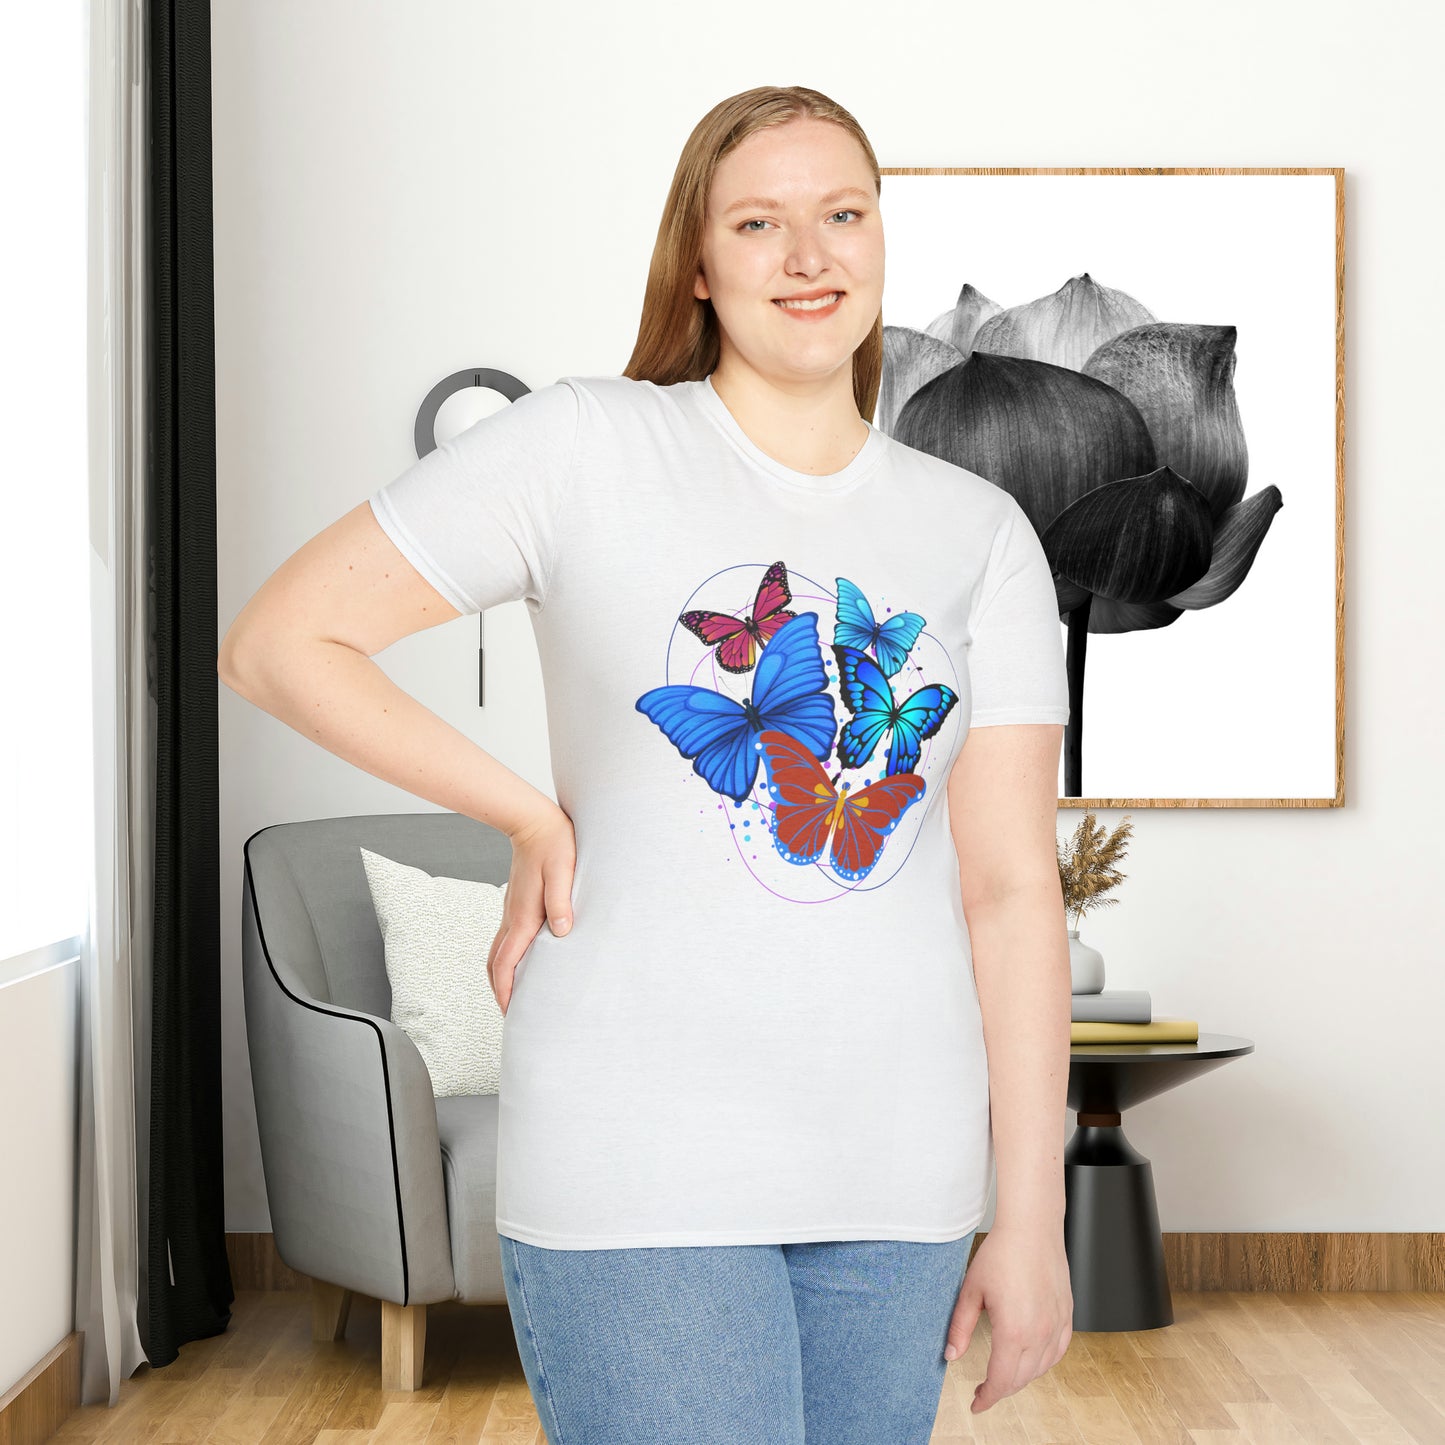 Butterflies are beautiful and fascinating! Over 17,500 recorded butterfly species. This Unisex Softstyle T-Shirt is for that butterfly lover.